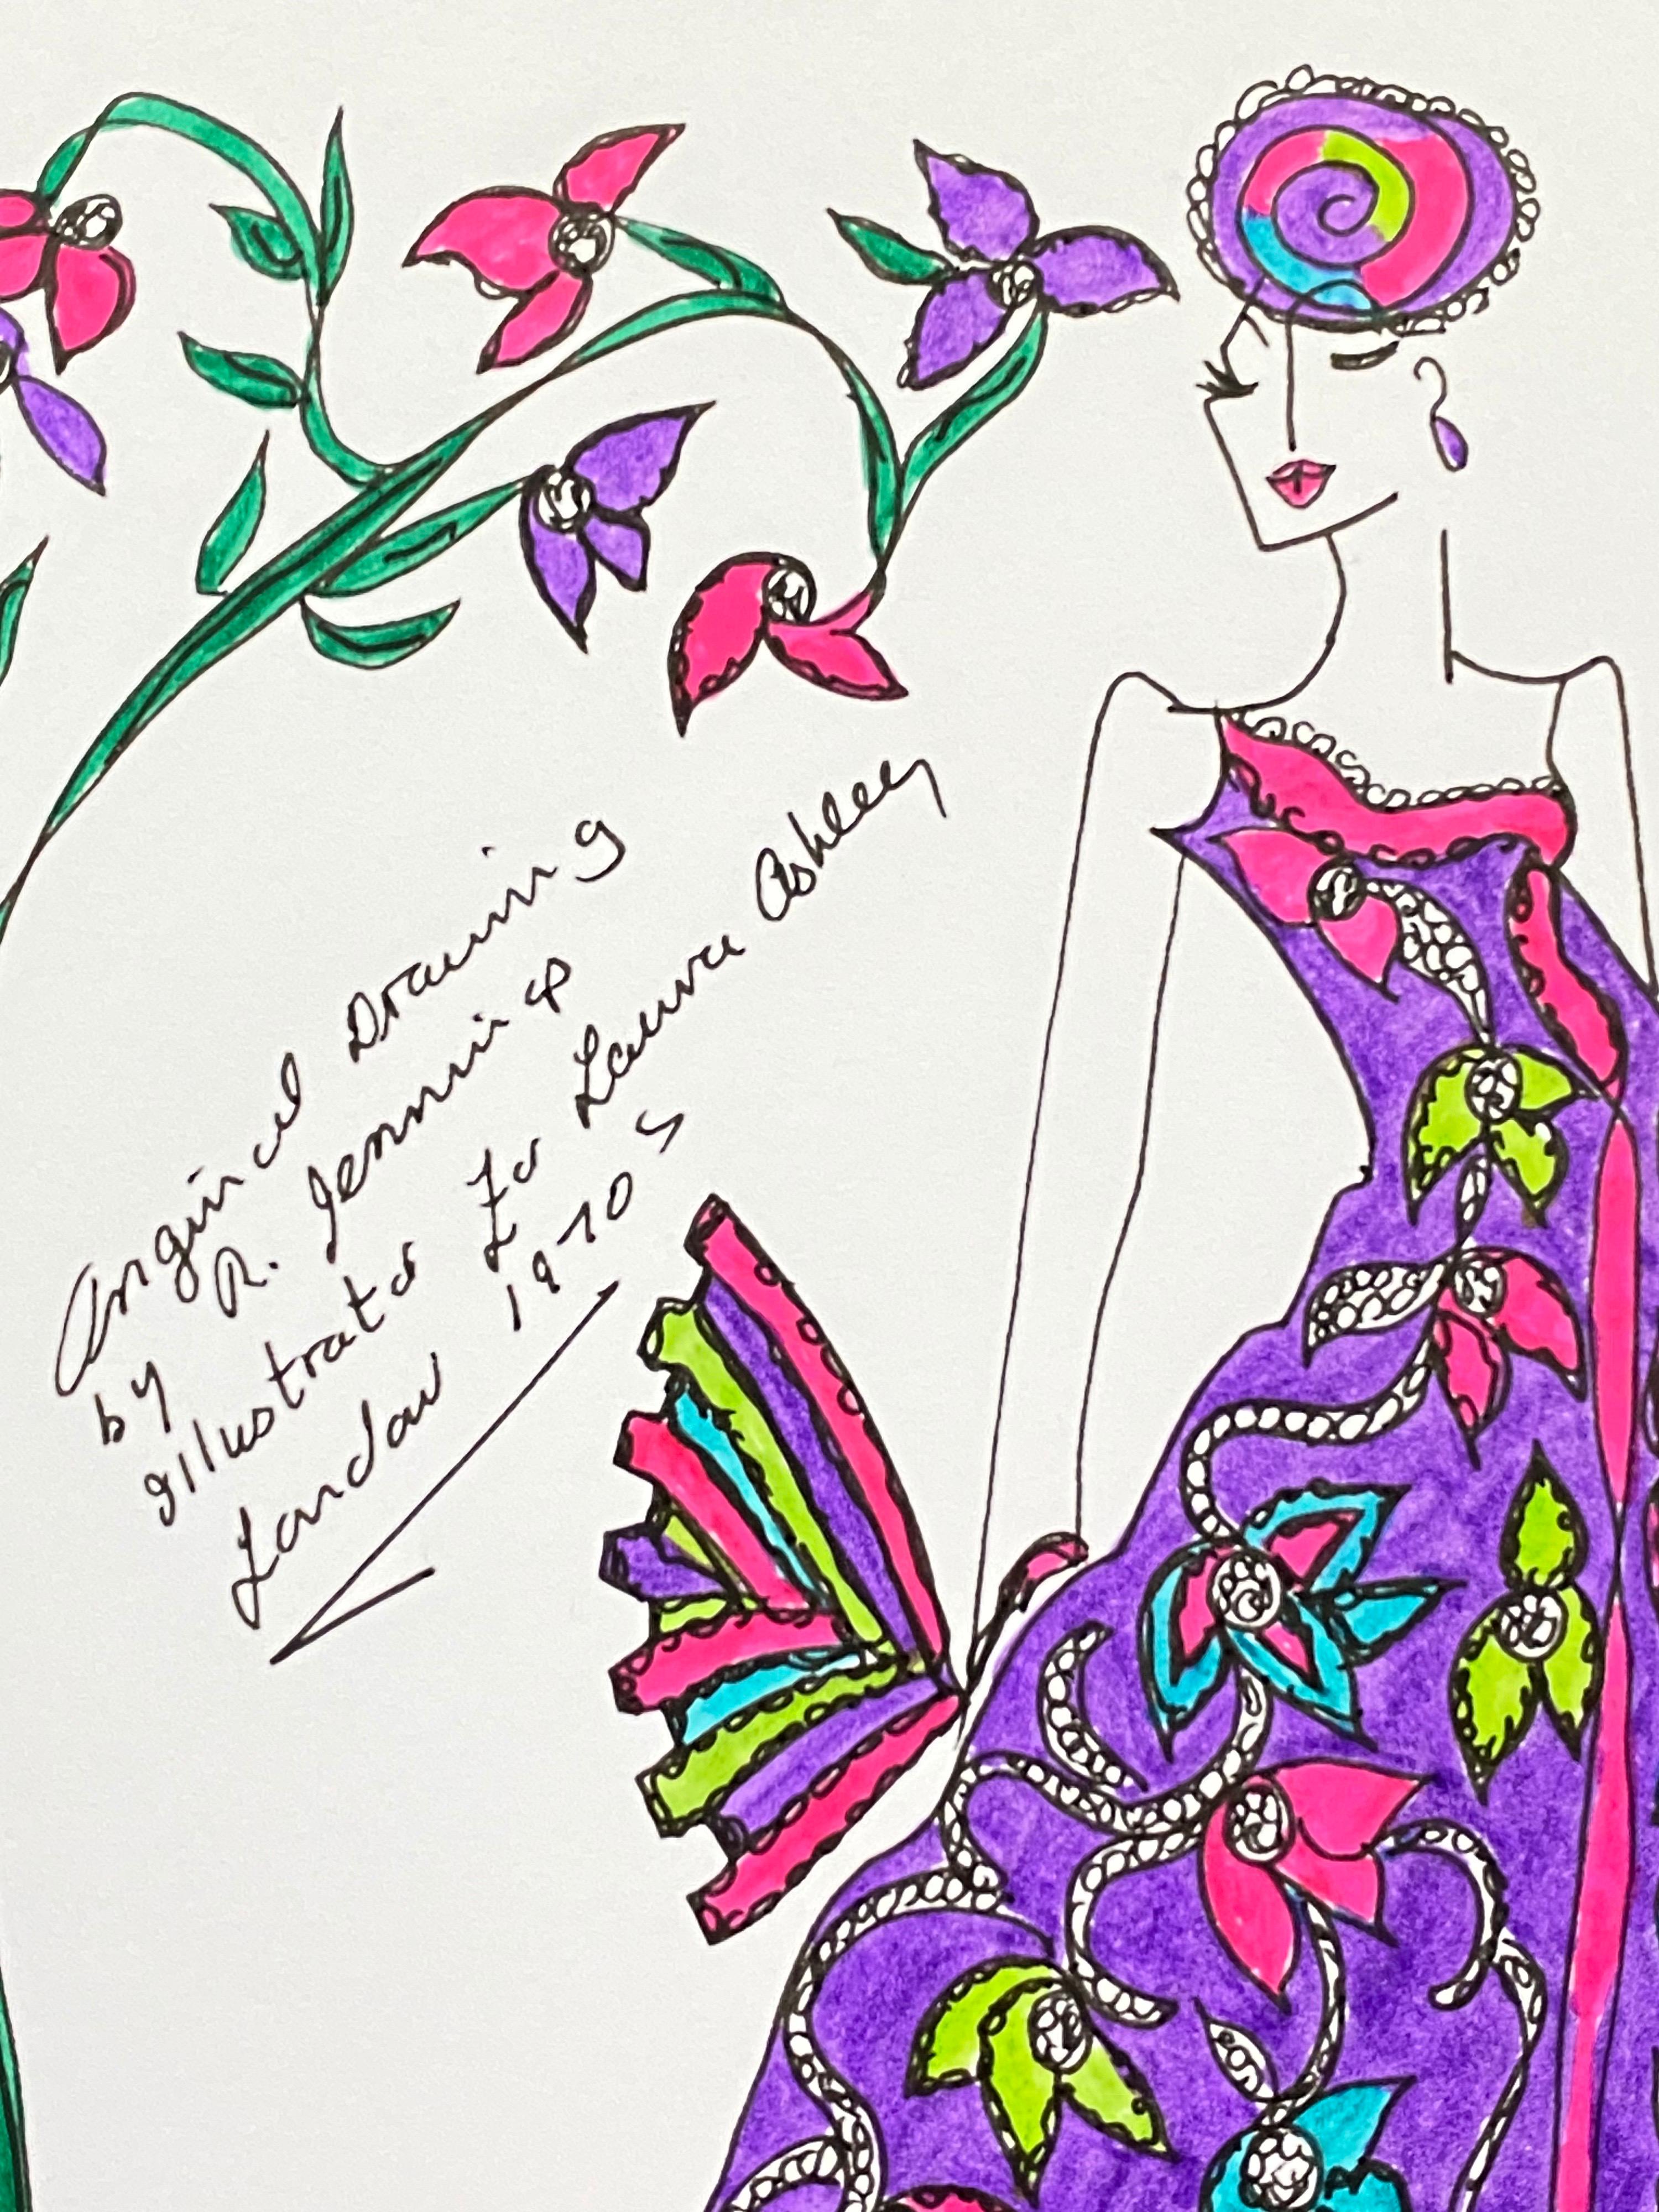 Original Fashion Design Illustration
by Roz Jennings, British
watercolor and ink on card, unframed
size: 12 x 8.25 inches
condition: very good

A beautifully colorful and characterful original artwork by British fashion designer, Roz Jennings. We